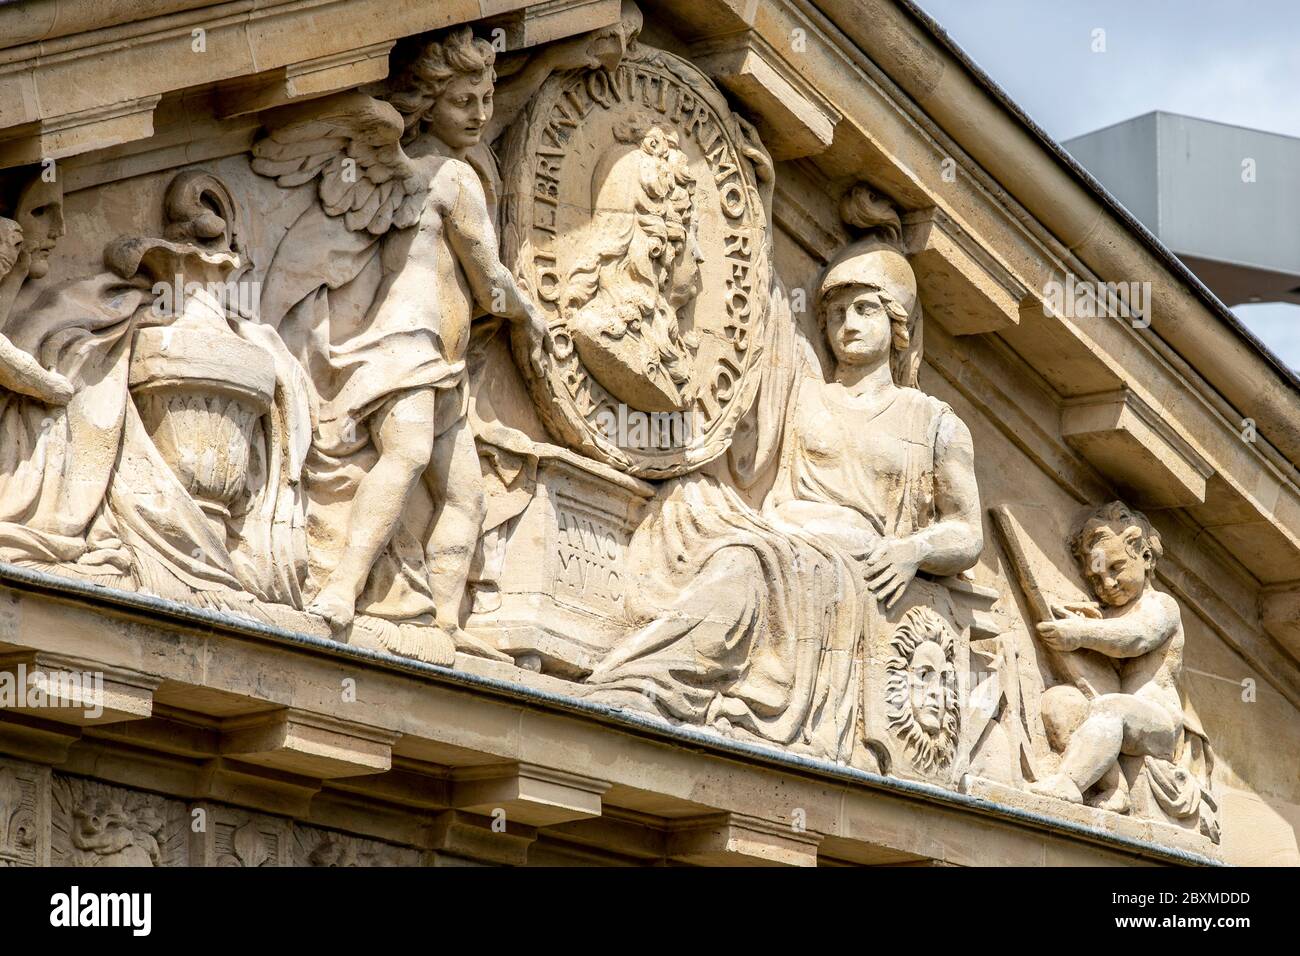 Paris, France - May 1, 2020: Private house with statue on the pediment in Paris Stock Photo